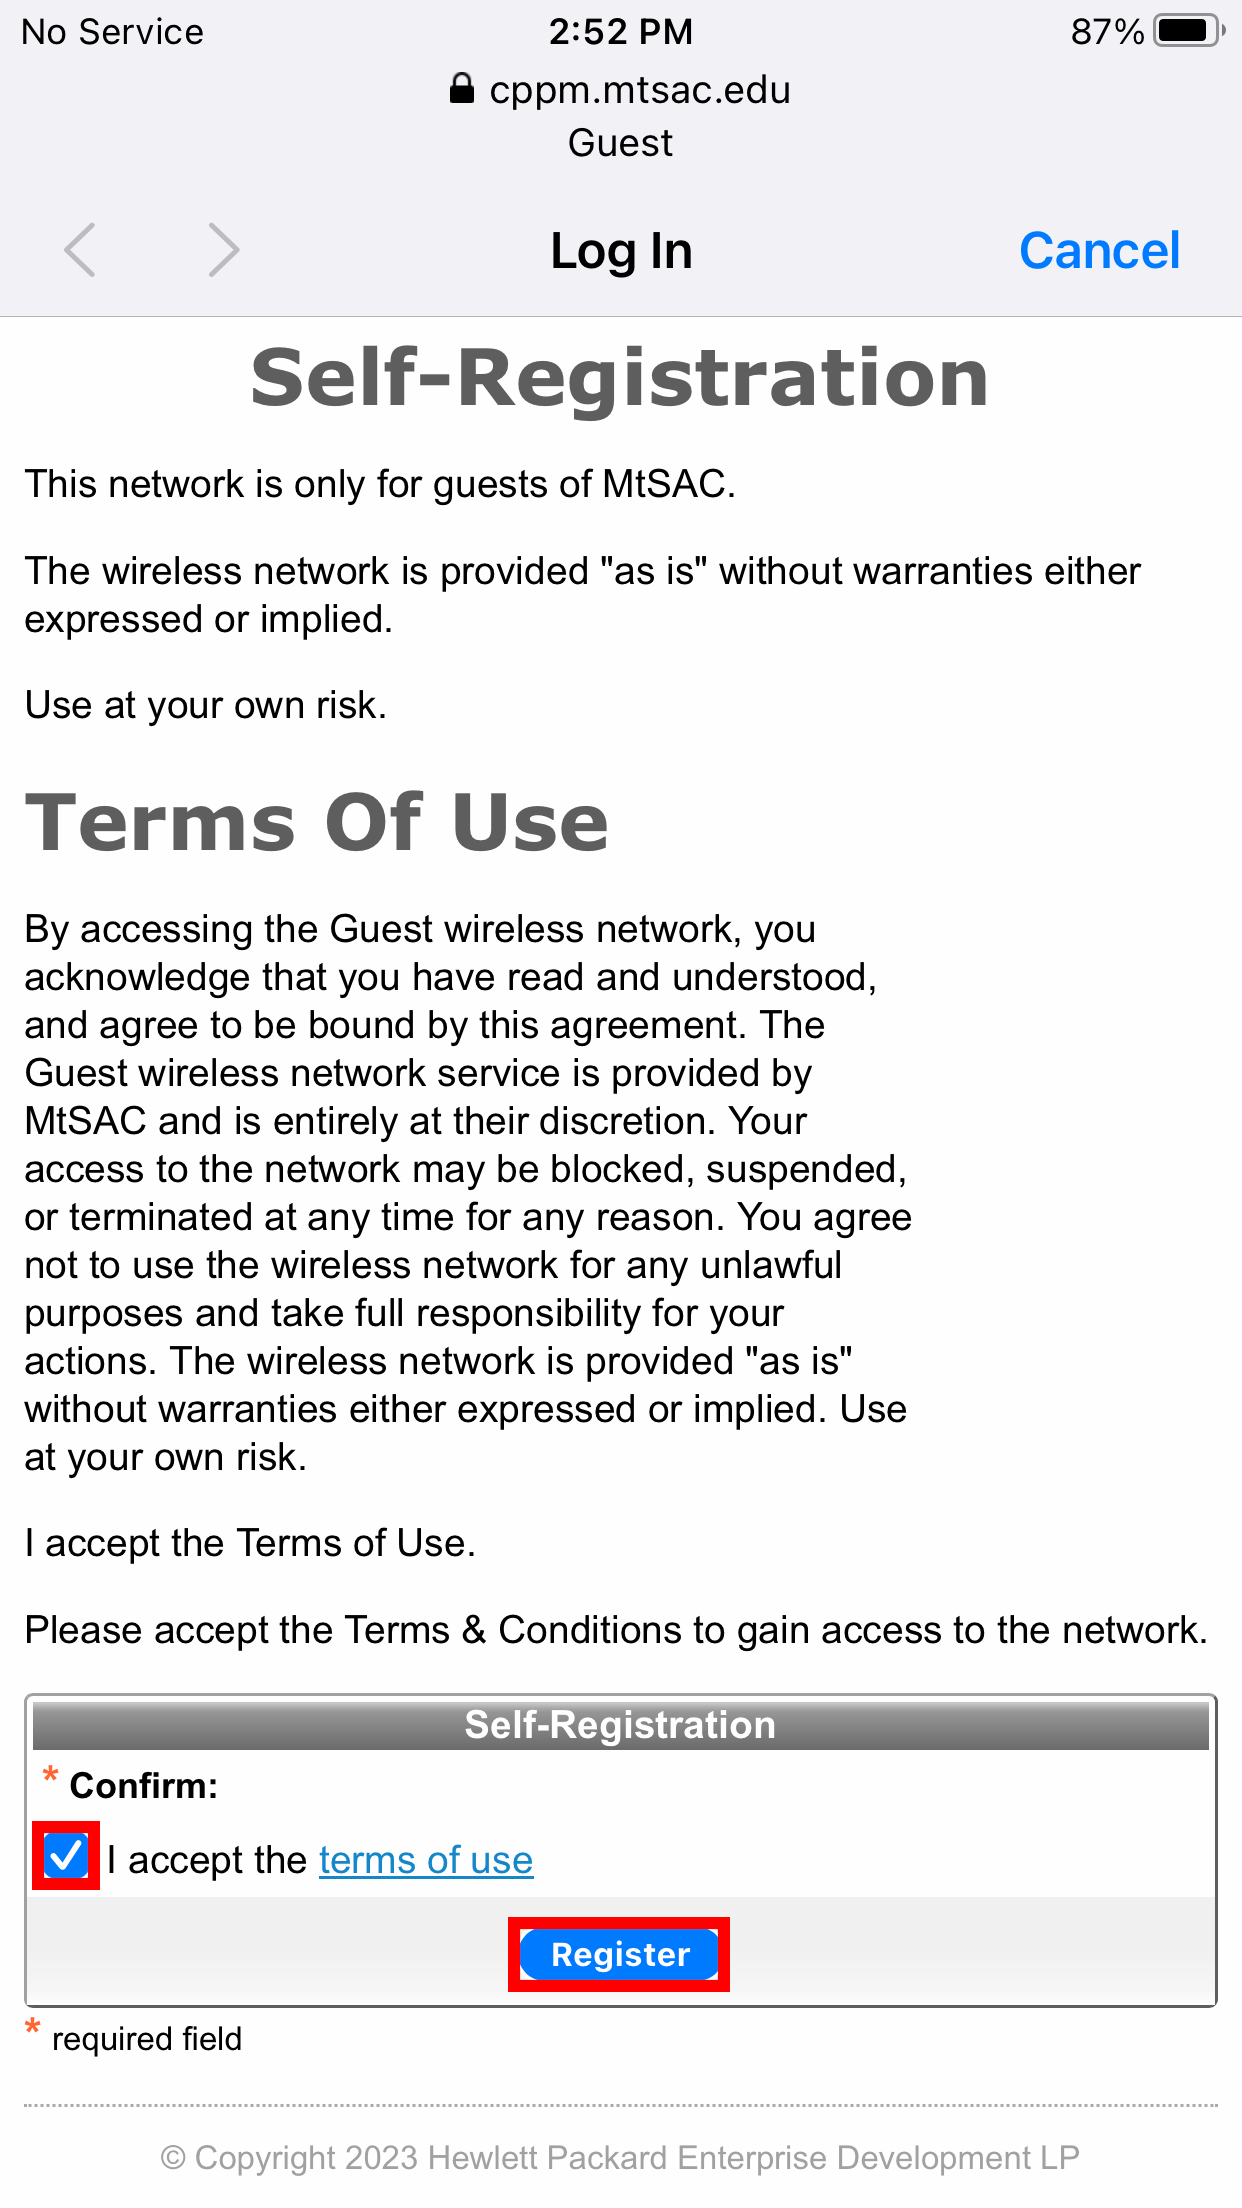 iOS screen displaying the Guest network's Terms of Use with the checkbox and Register button highlighted